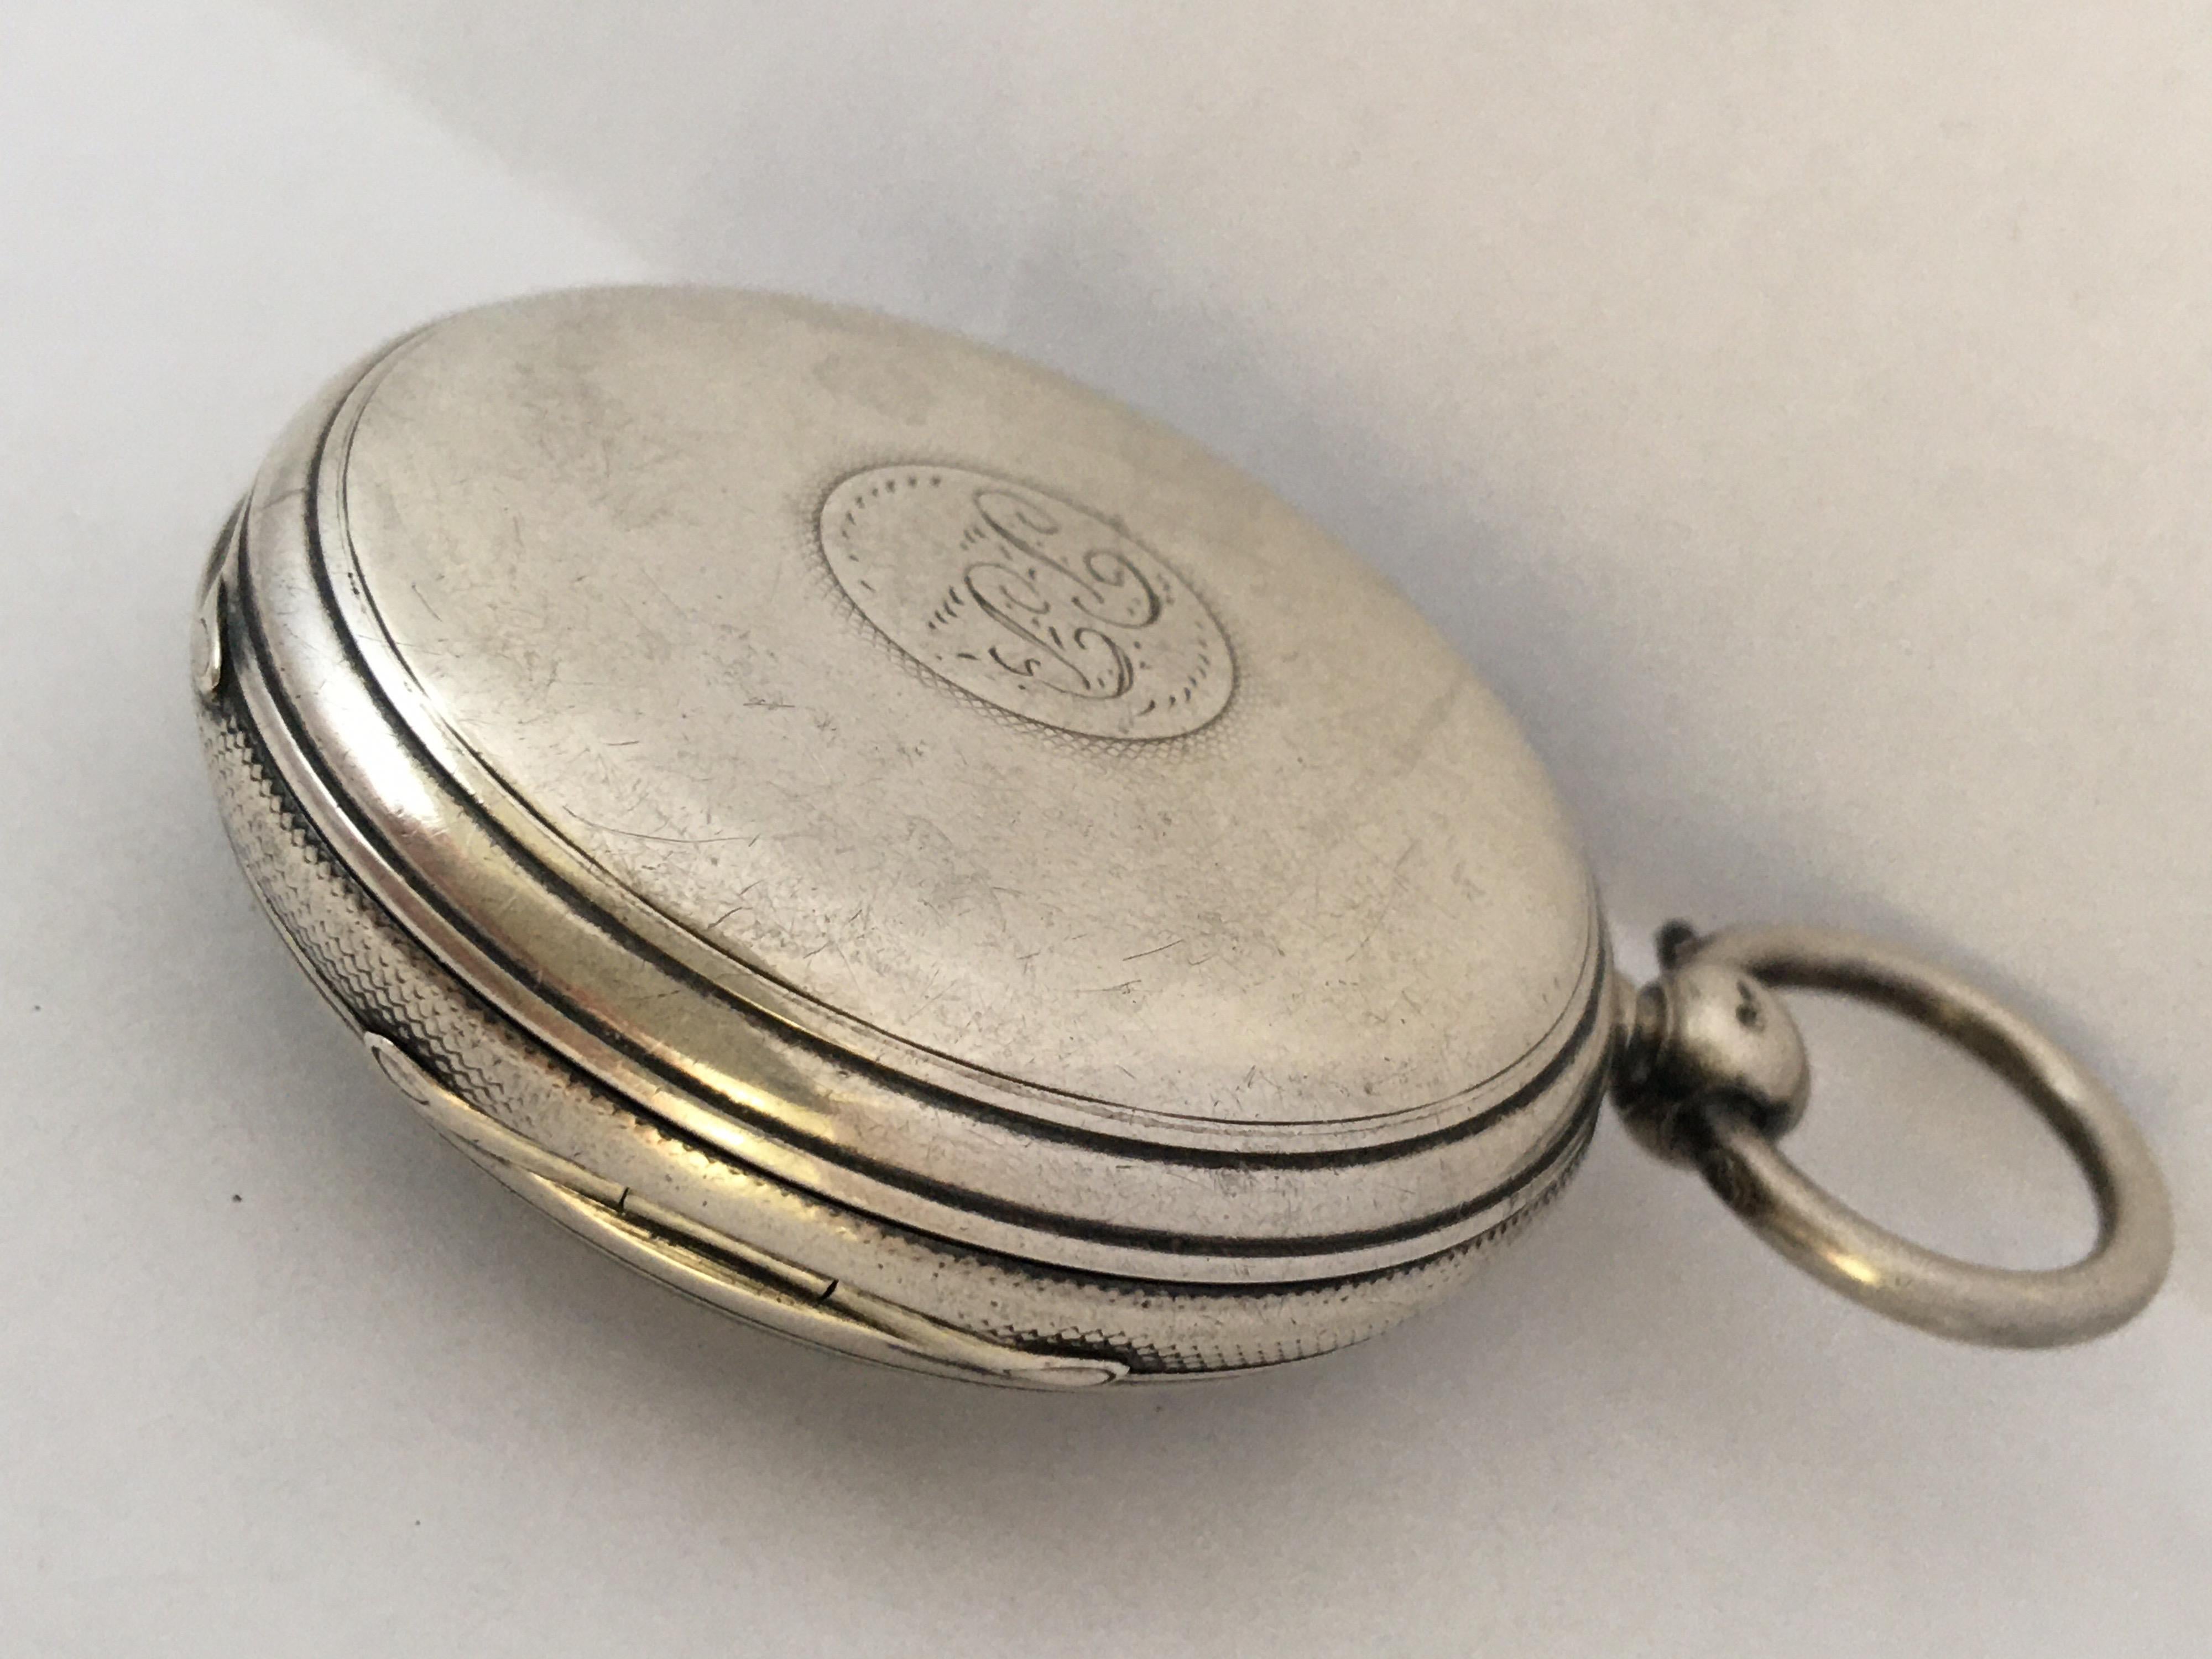 Antique Silver Key-Winding Pocket Watch Signed Charles Reeves, Hereford For Sale 9